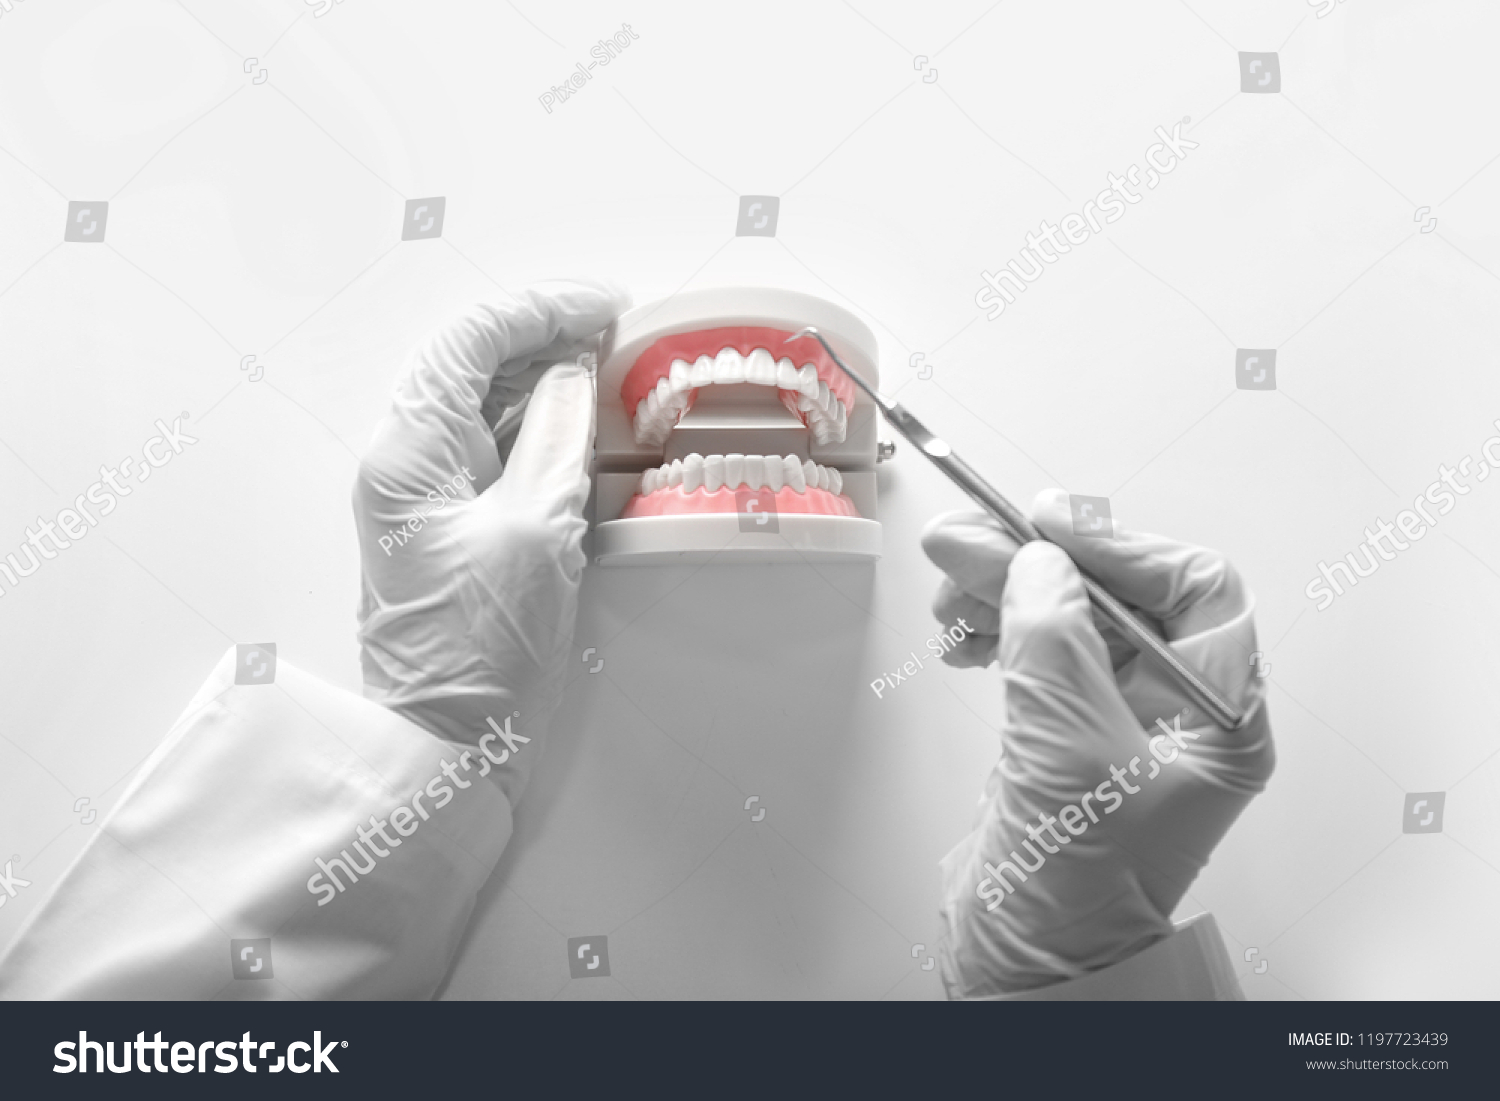 Dentist with artificial jaw and dental tool on white background #1197723439